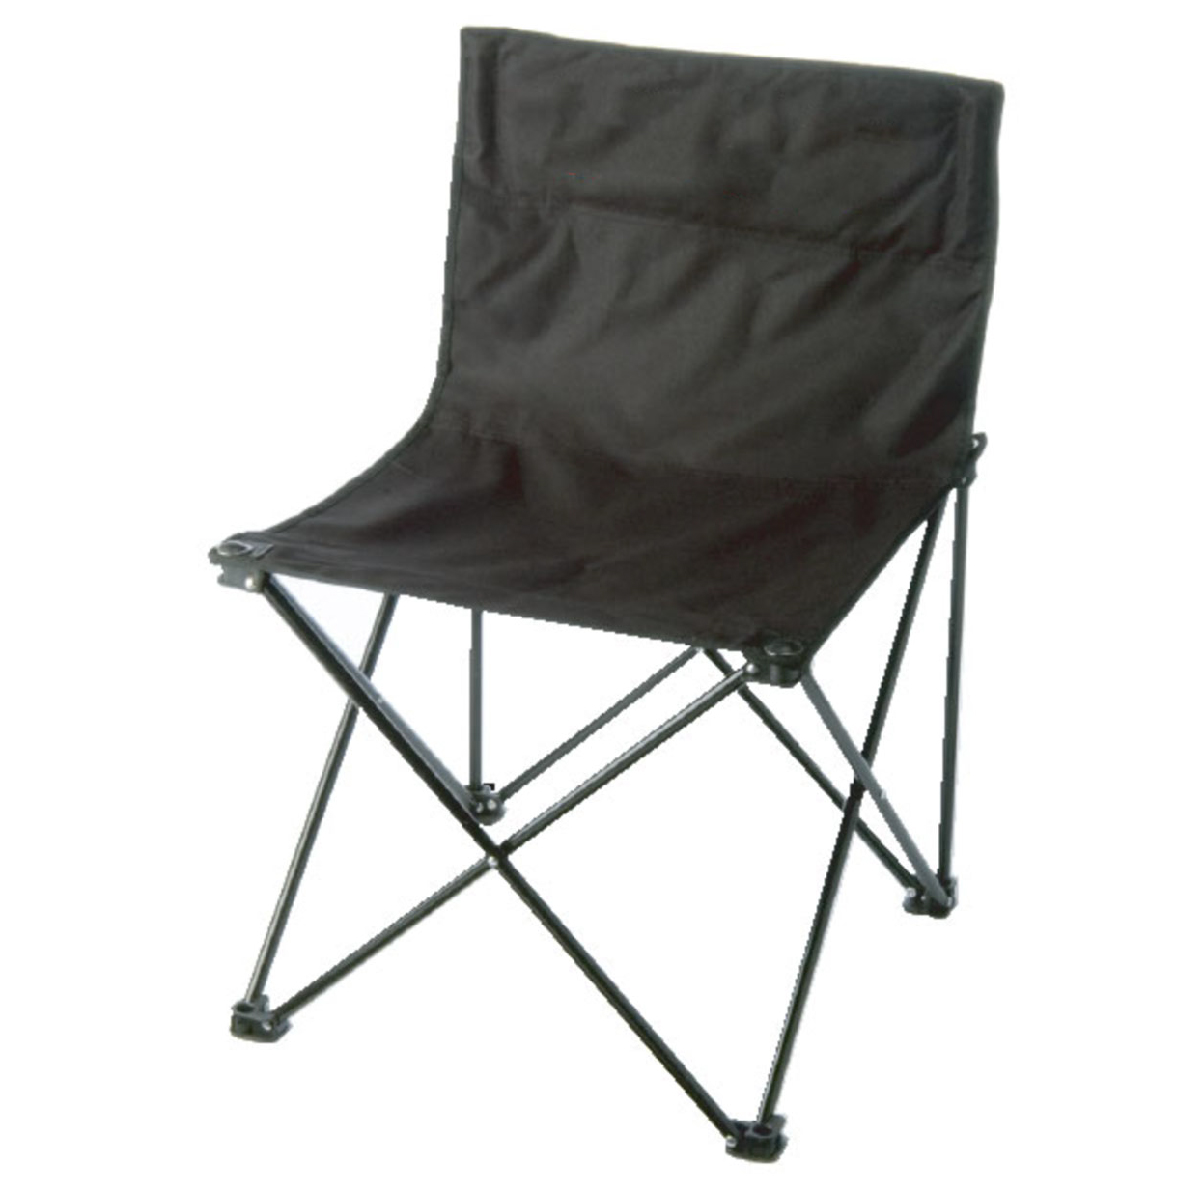 Black Deluxe Portable Folding Chair 